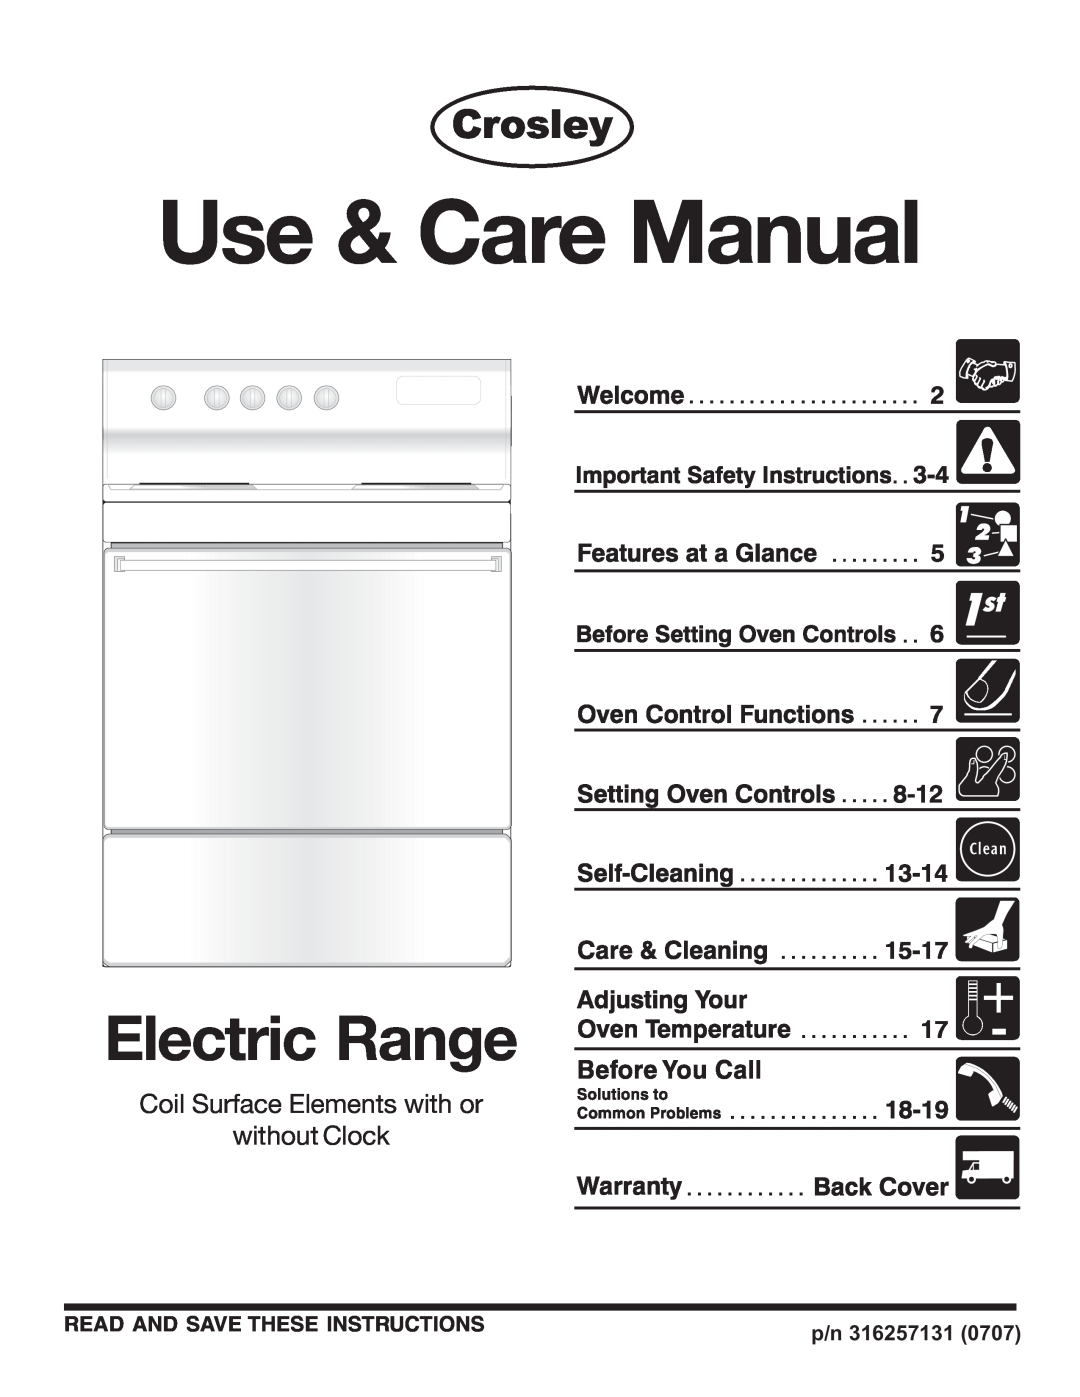 Crosley 316257131 manual Read And Save These Instructions, Use & Care Manual, Electric Range, p/n 